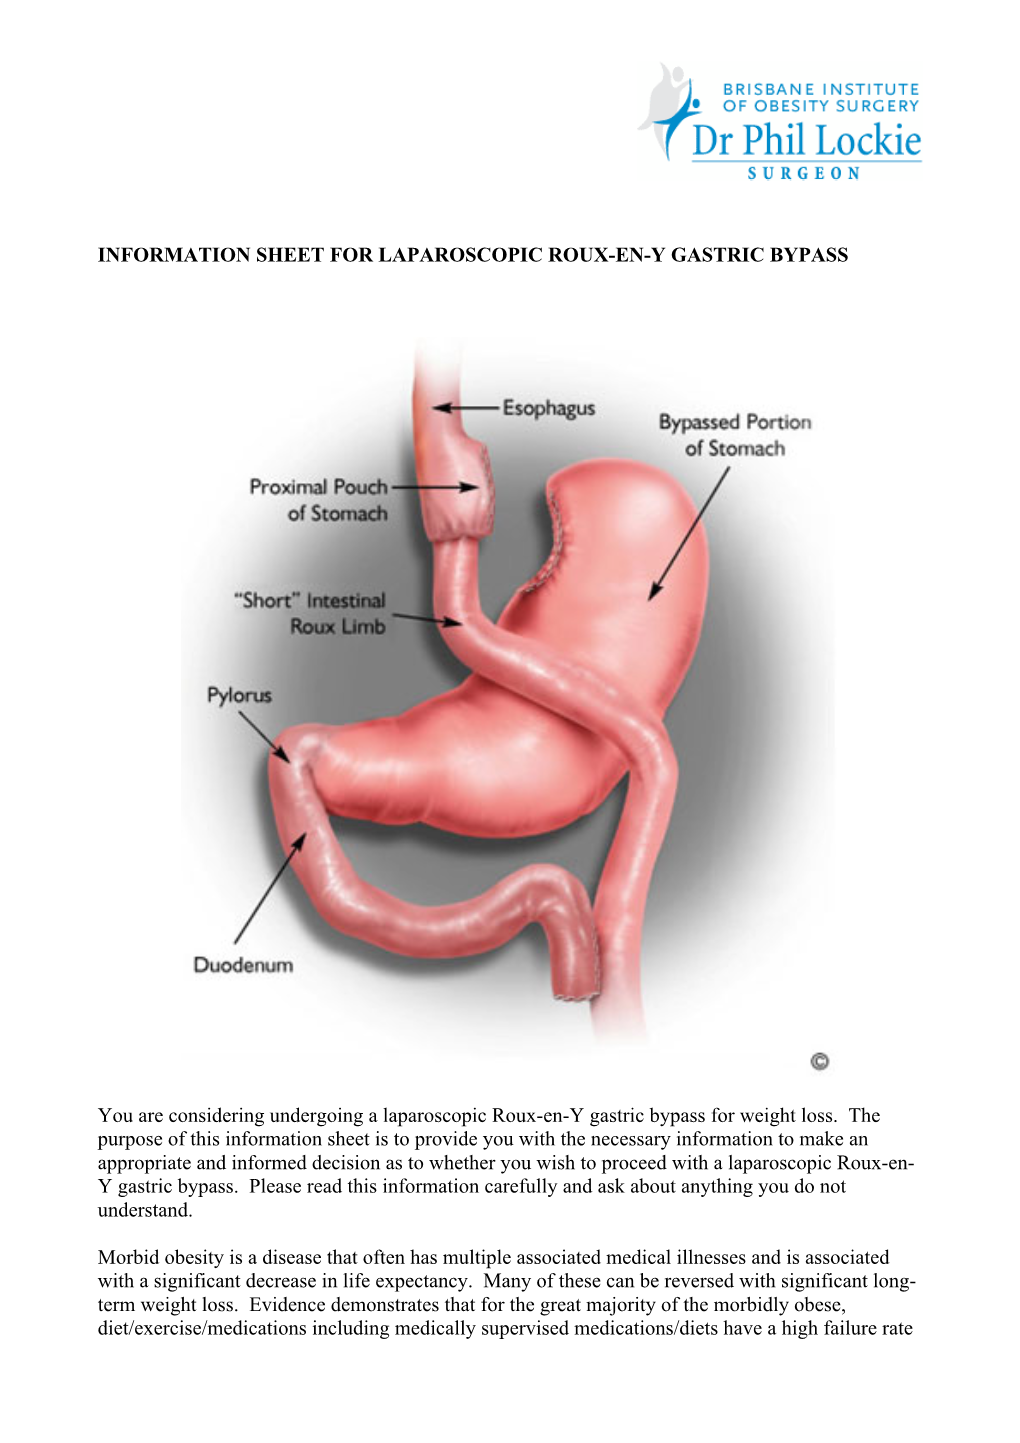 Information Sheet for Laparoscopic Roux-En-Y Gastric Bypass